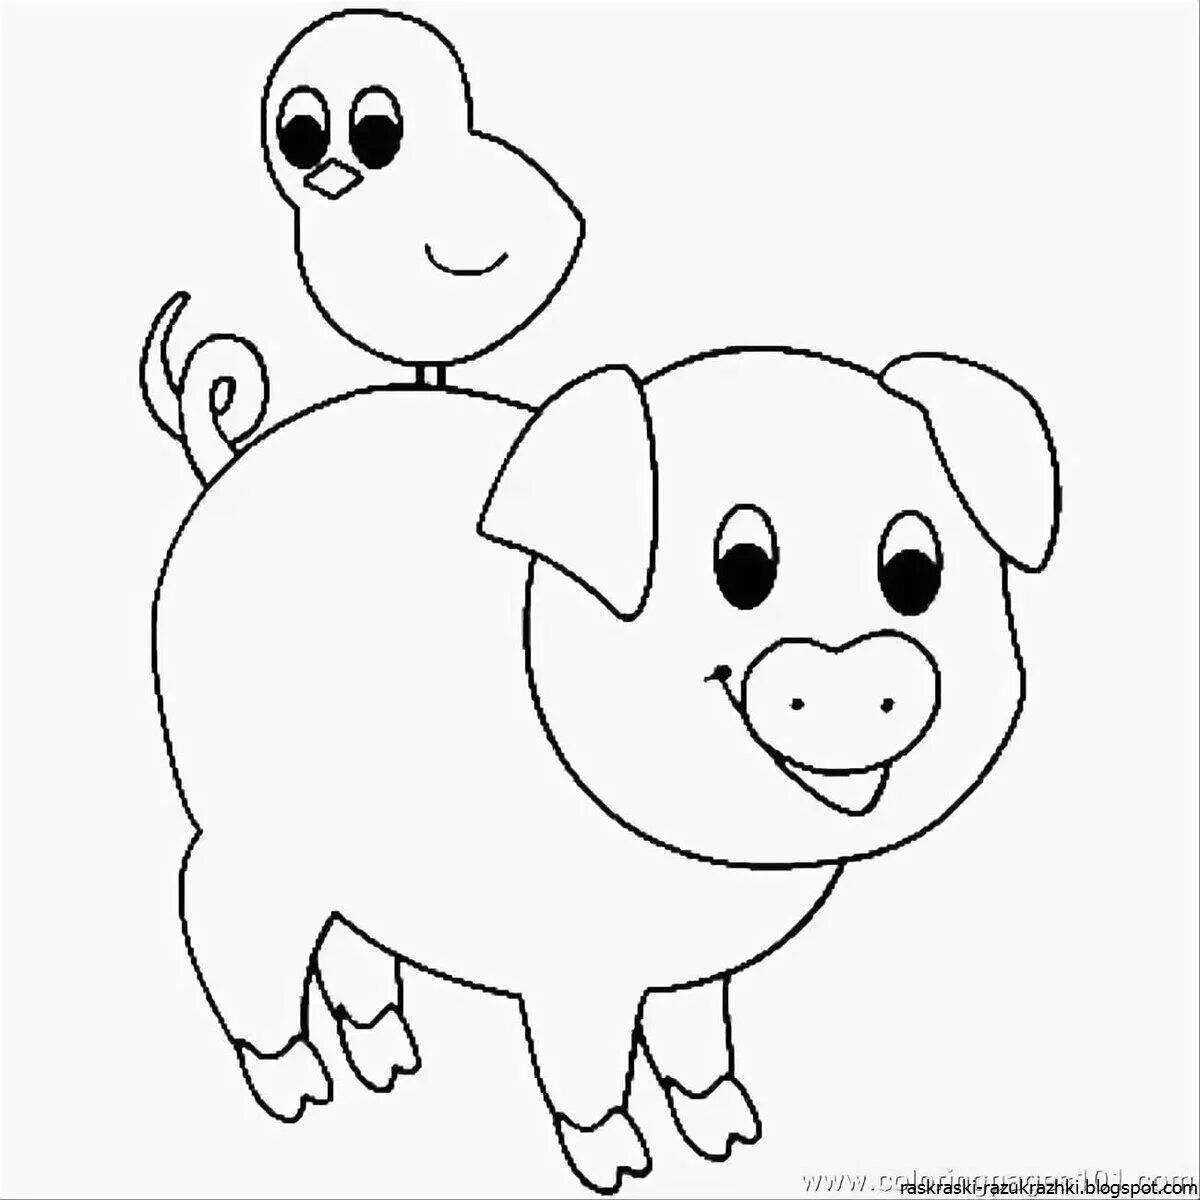 Affectionate pet coloring pages for kids